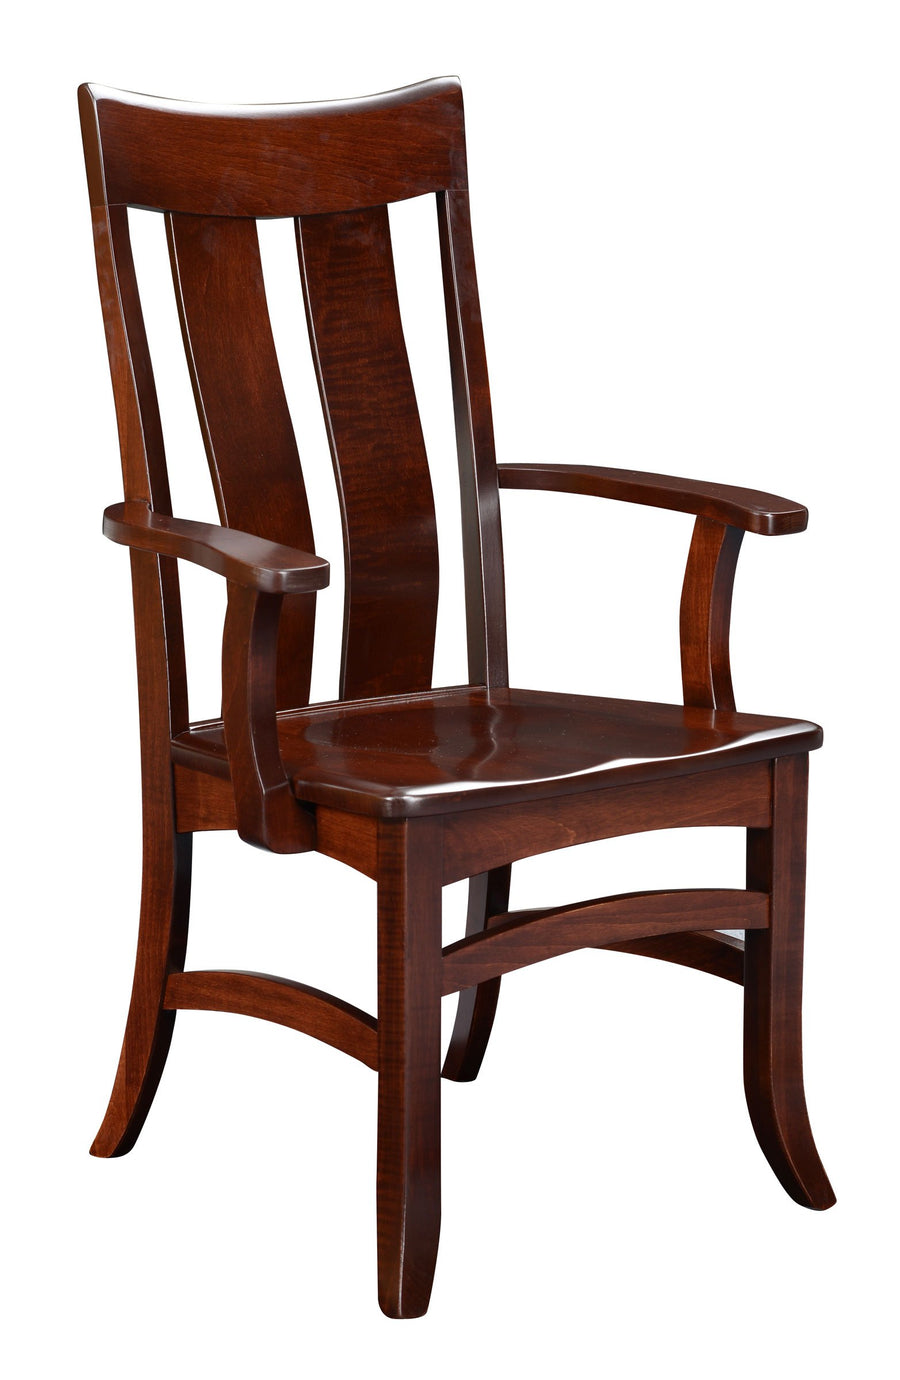 Galveston G2 Amish Solid Wood Arm Chair - Foothills Amish Furniture